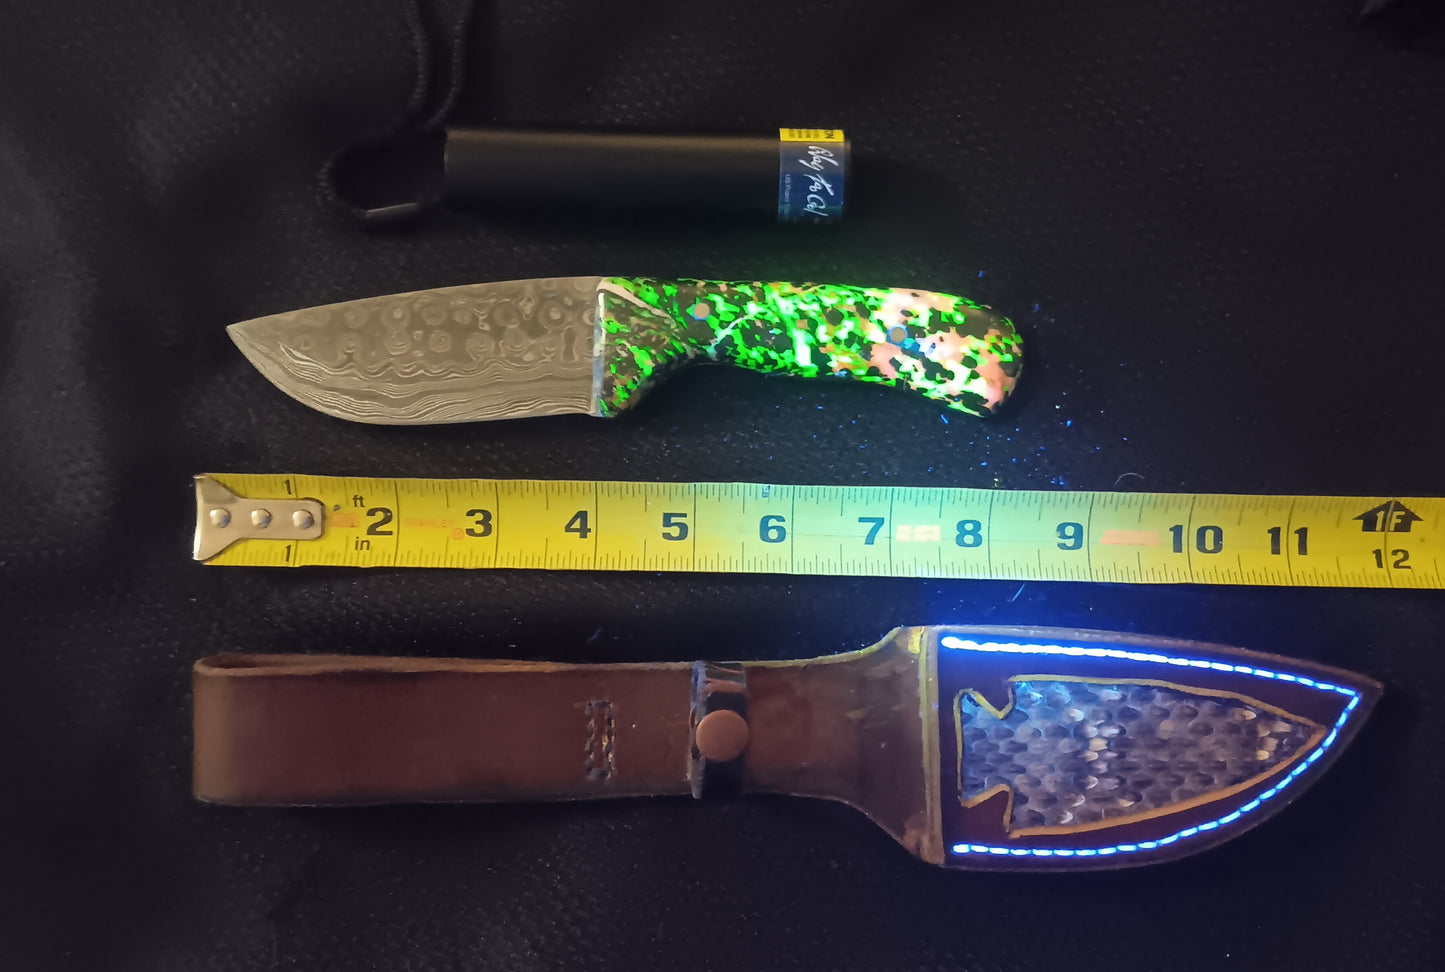 Willemite Knife with Damascus blade and Rattlesnake sheath